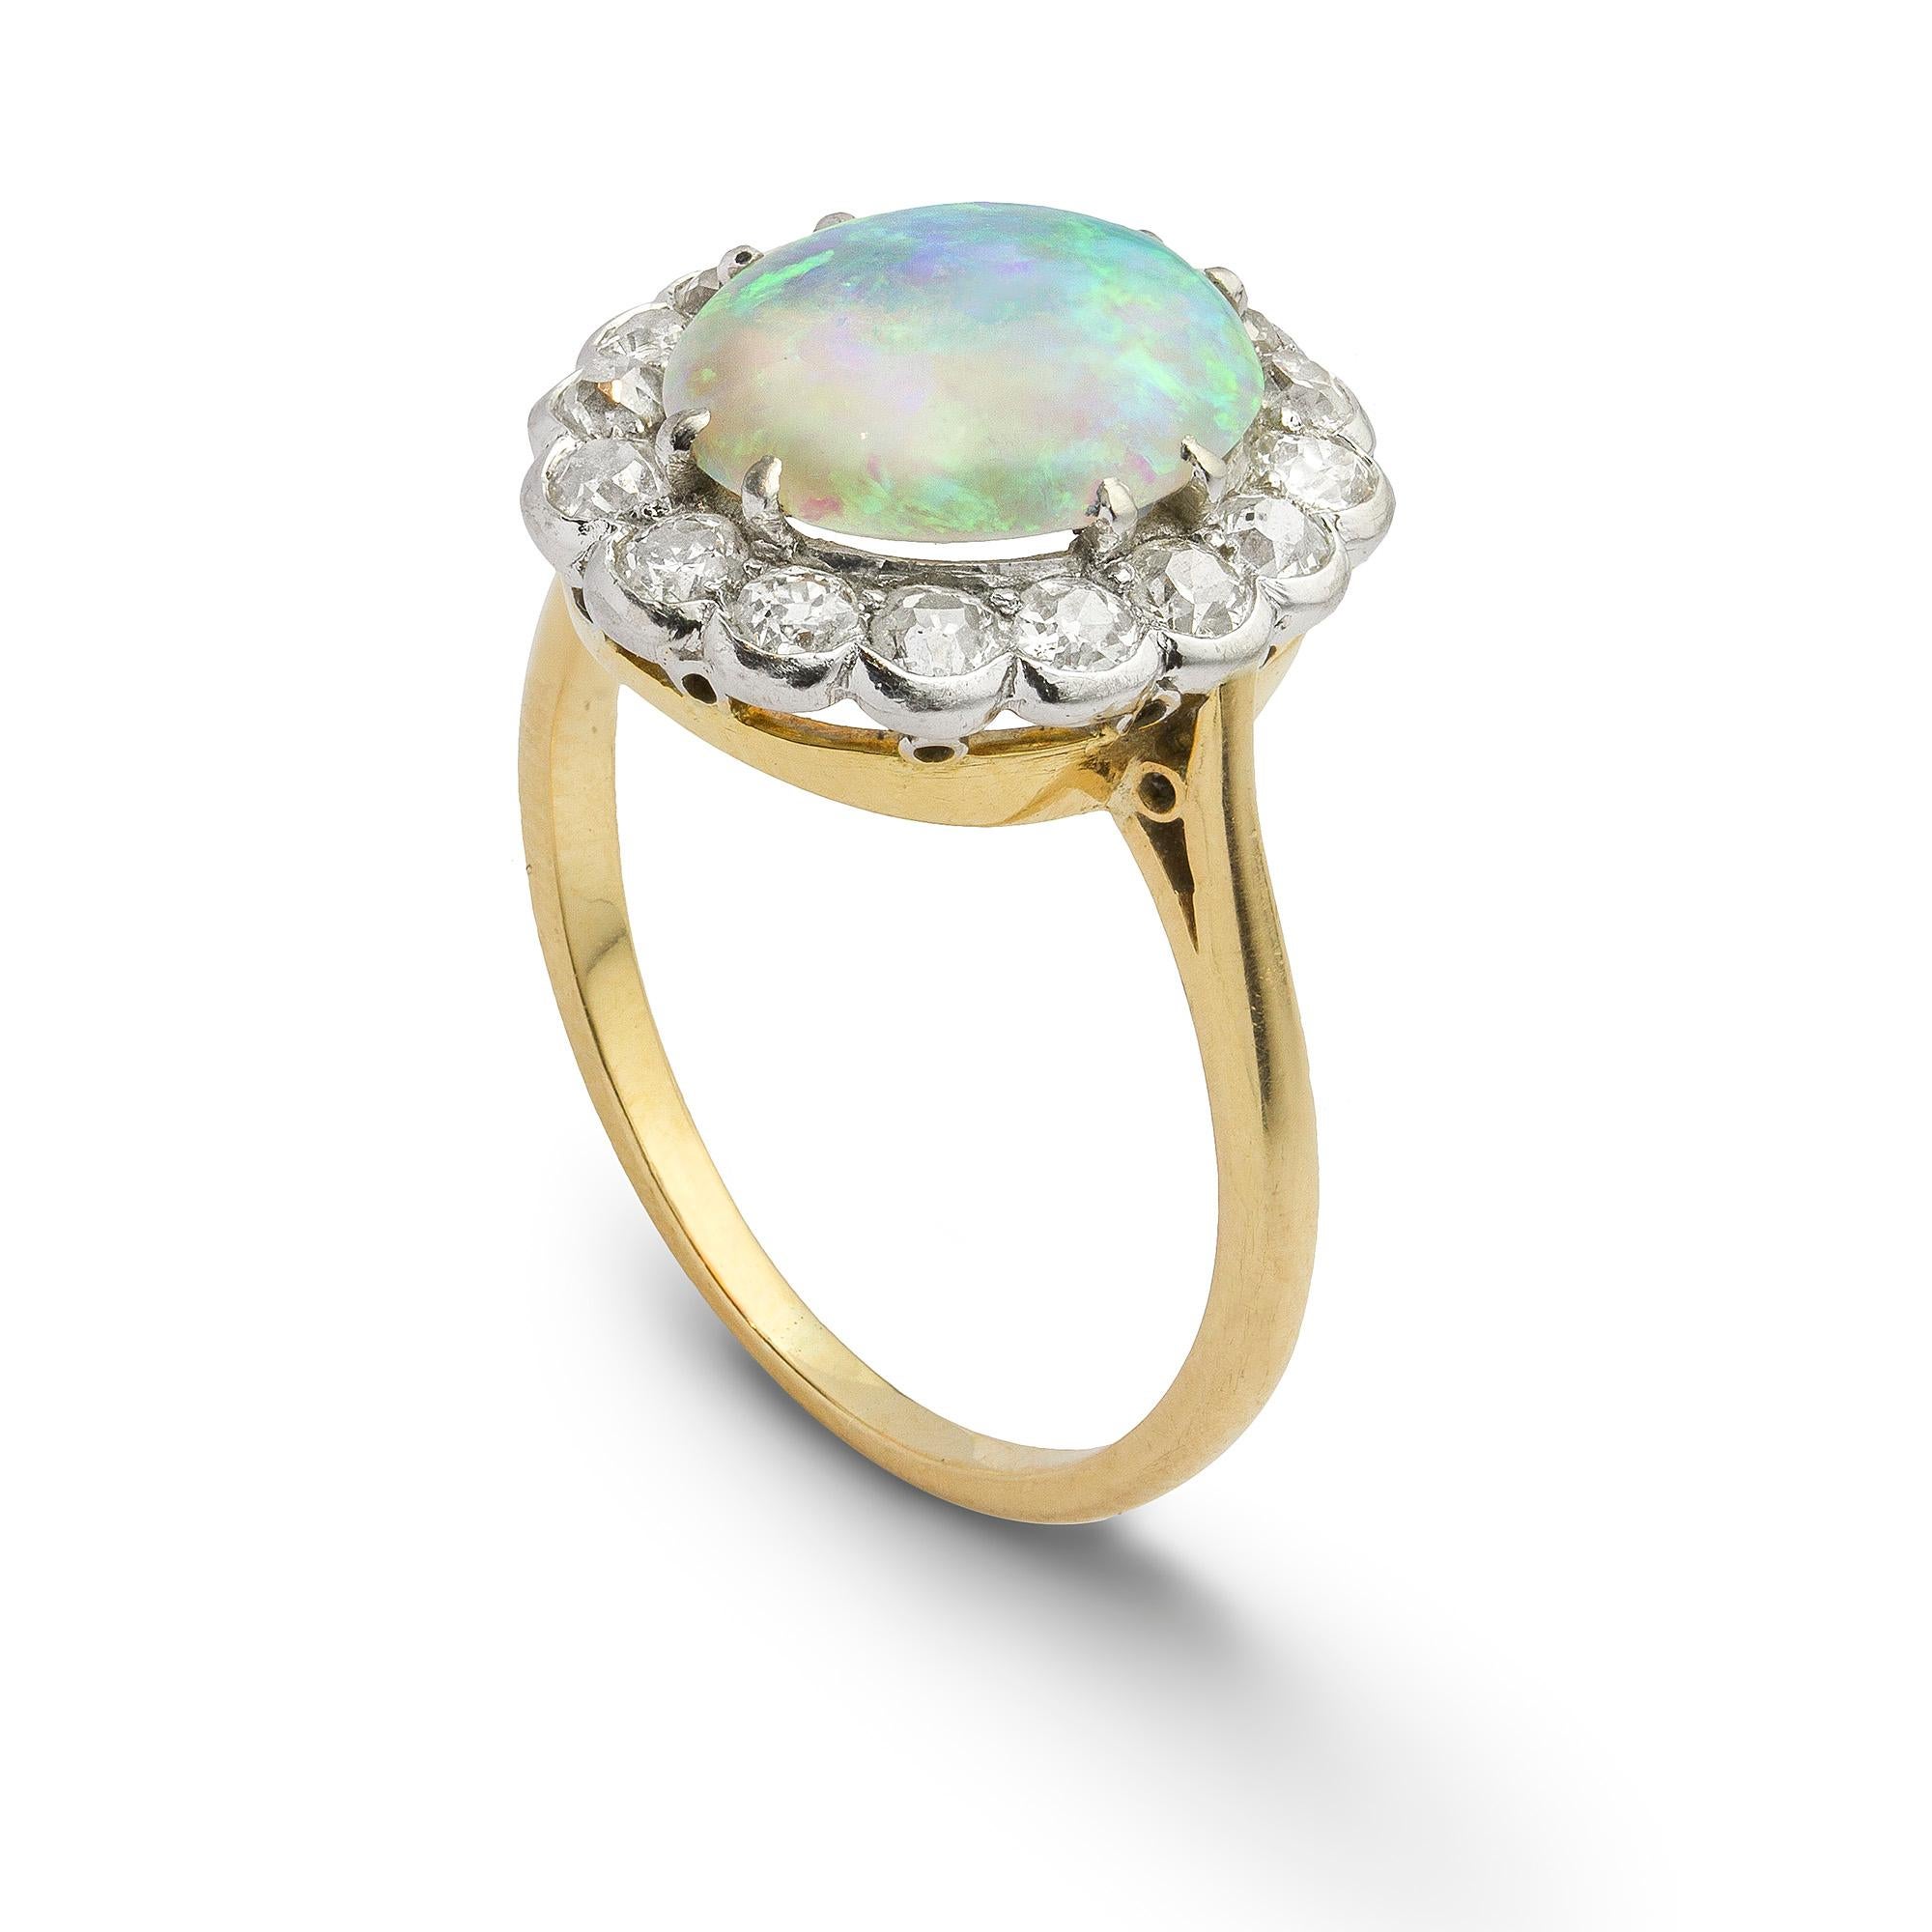 An early 20th century opal and diamond cluster ring, the oval cabochon cut opal measuring approximately 10.7 x 9mm claw set to the centre of an old cut diamond surround, estimated to weigh 0.7 carats in total, in white rub over setting to a yellow